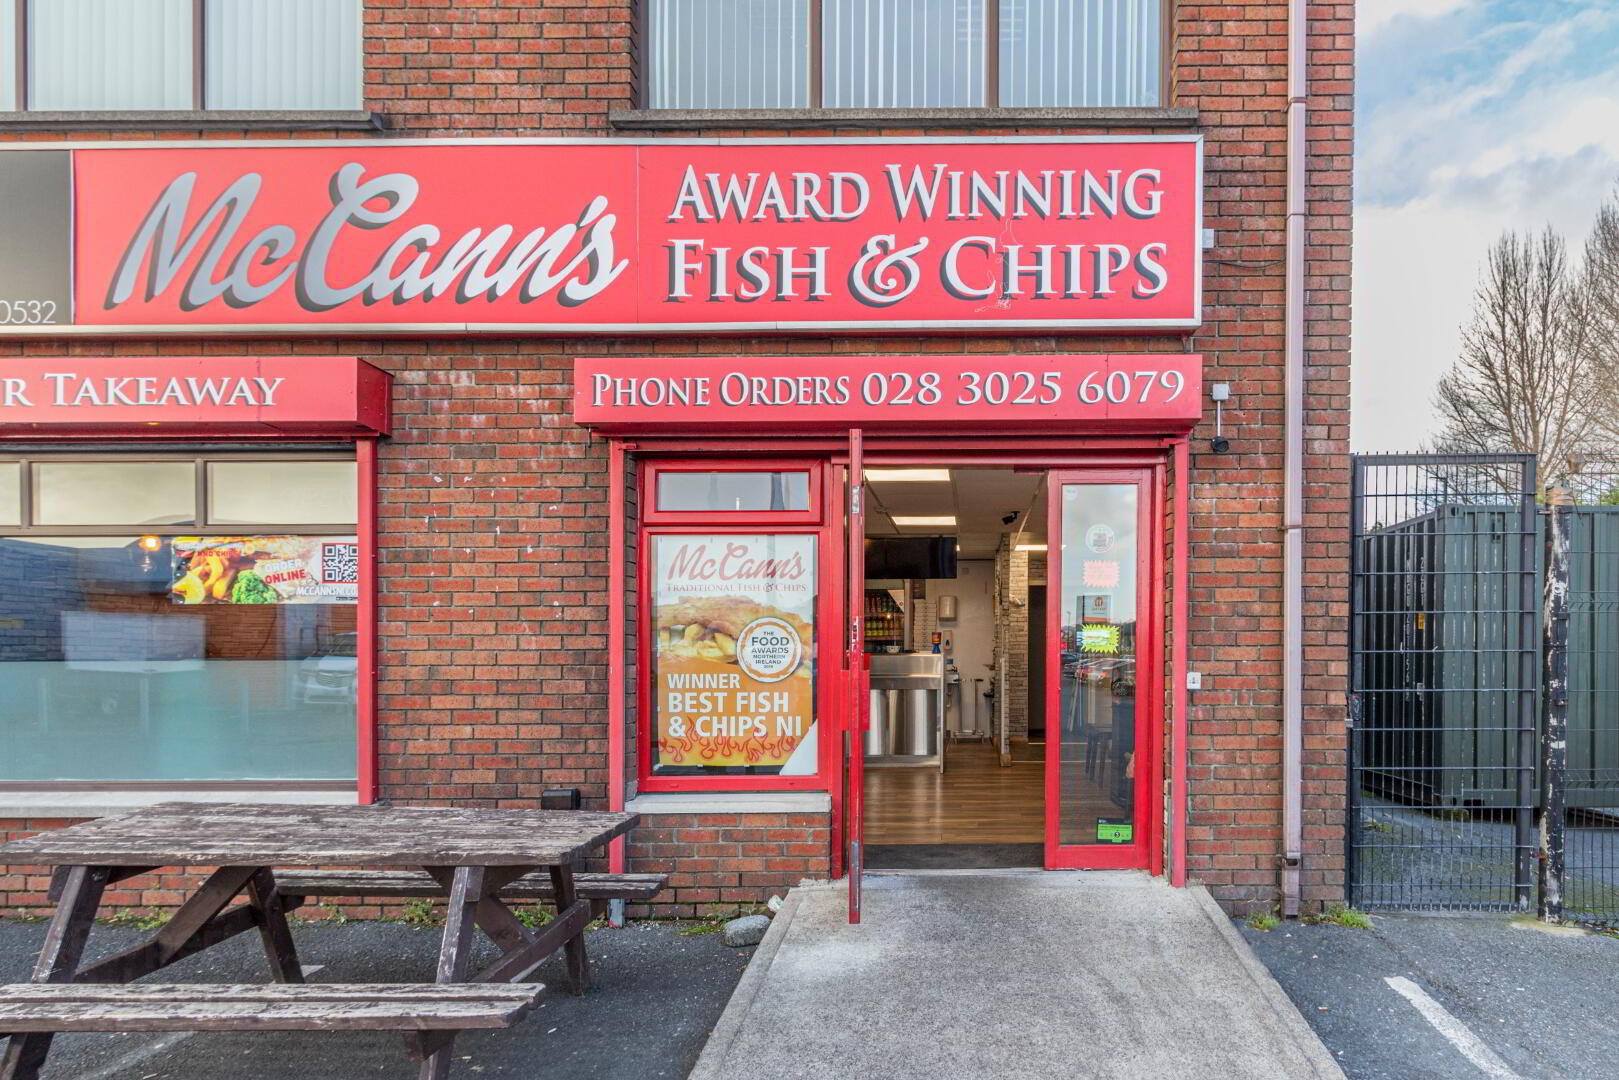 Mc Canns Traditional Fish & Chips, Unit 8 Warrenpoint Road